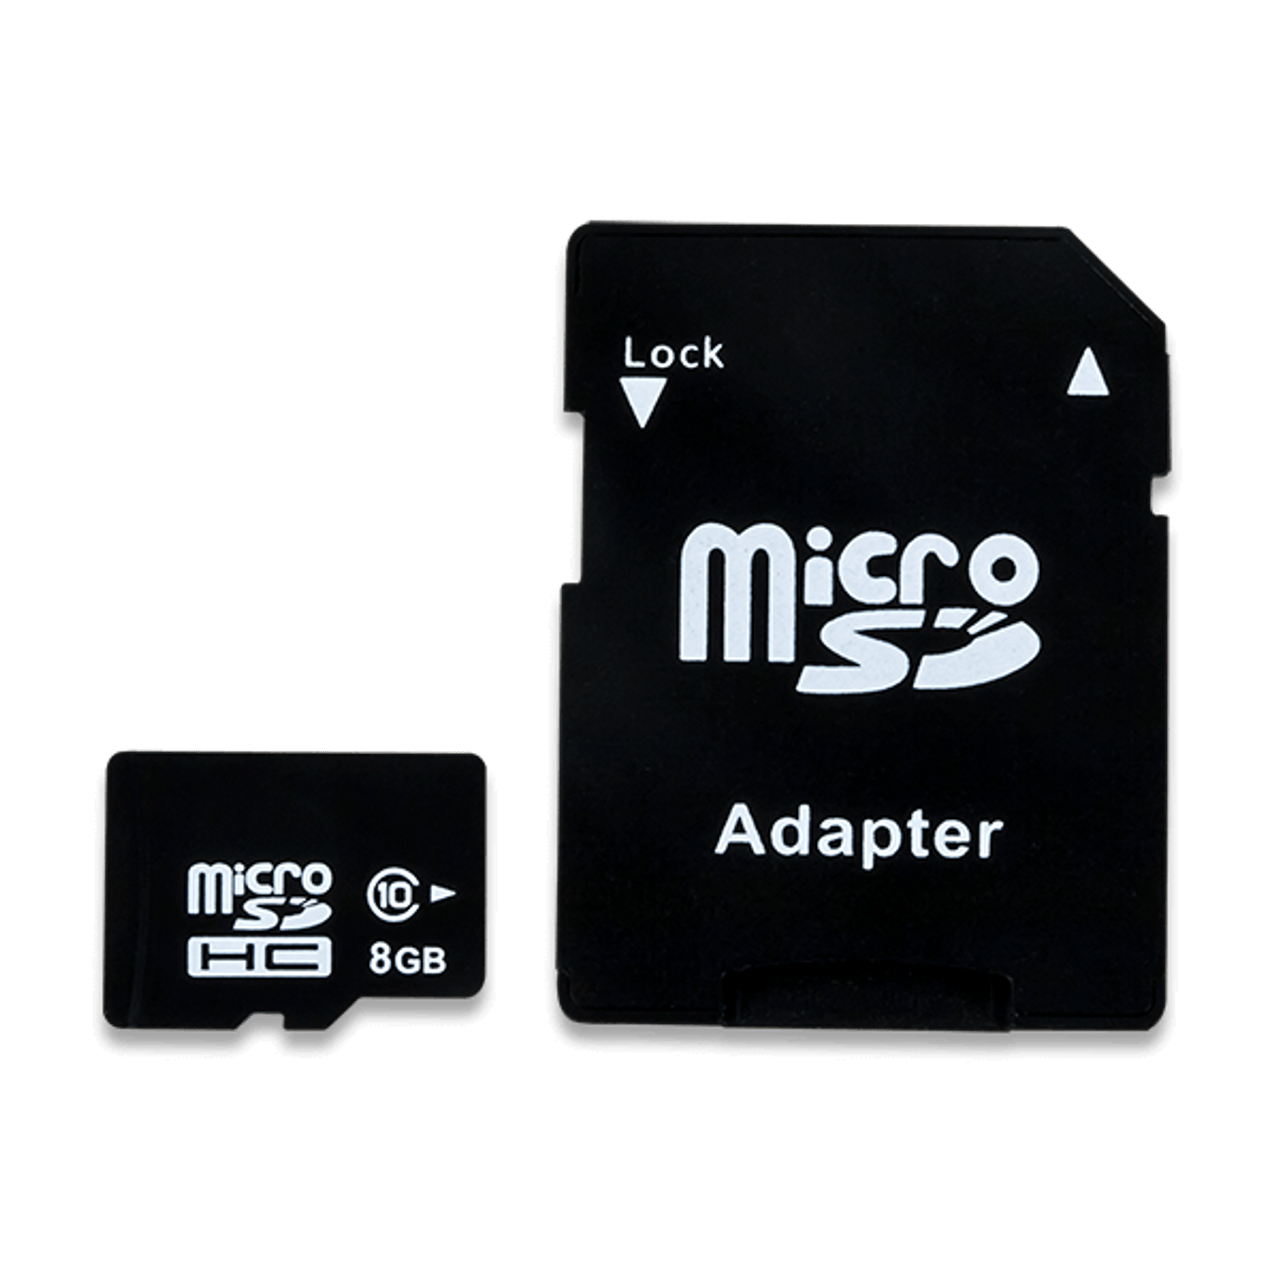 Card with Adapter - Digilent